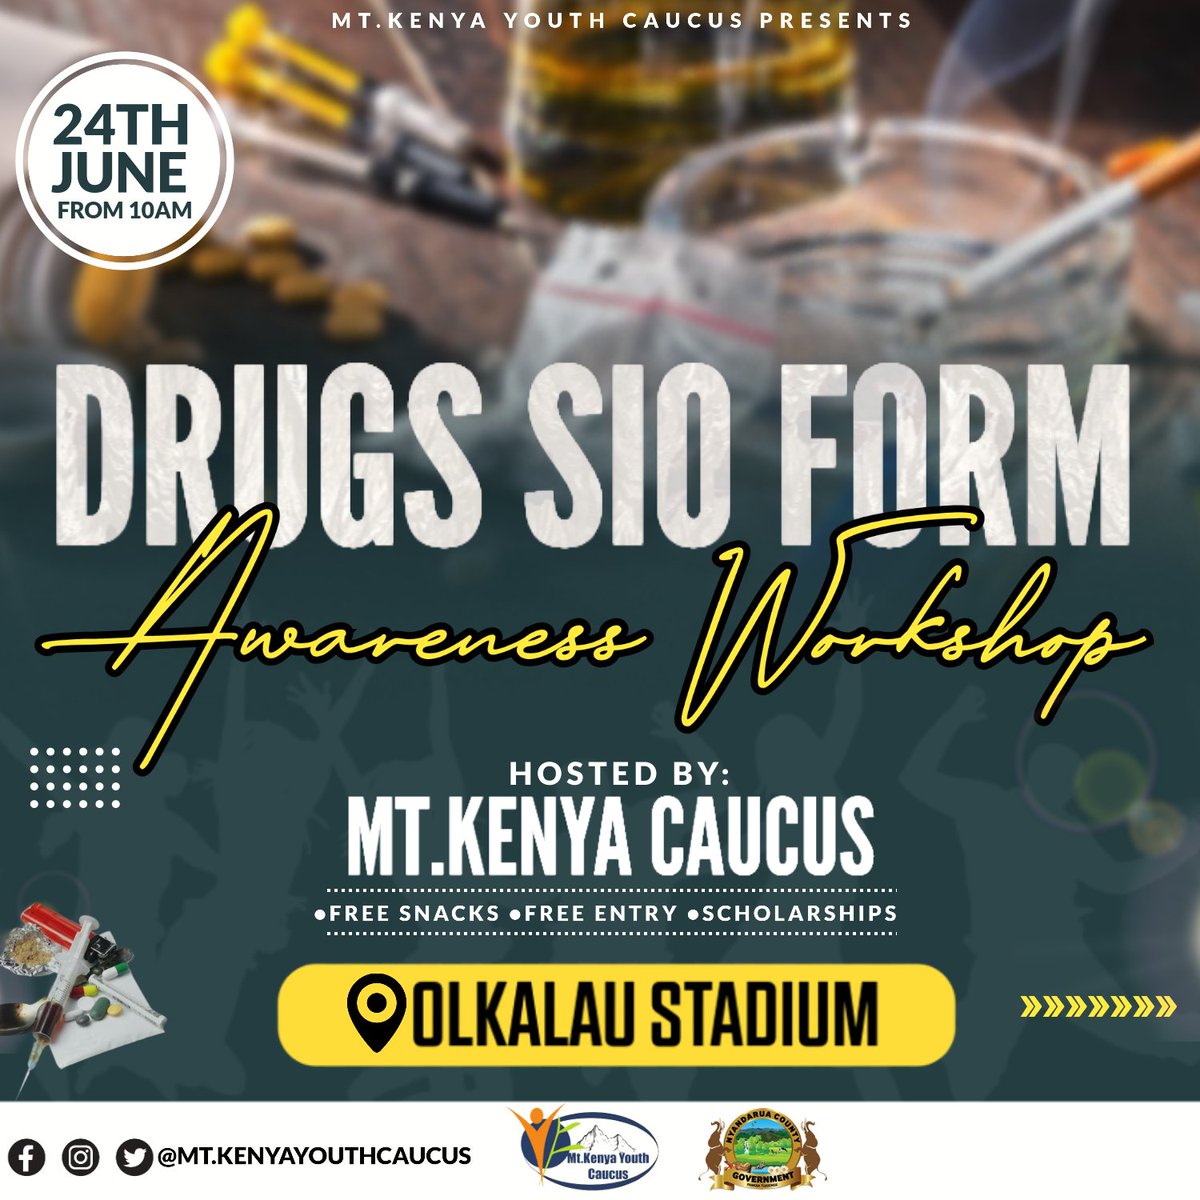 The event we are hosting at Nyandarua County Ol Kalou stadium on 24th june is a drug awareness workshop event. The workshop will cover topics such as the dangers of drug use, how to avoid drug addiction, and the effects of drug abuse.#HaneyLoma #YoungFamousAndAfrican #KatieTaylor